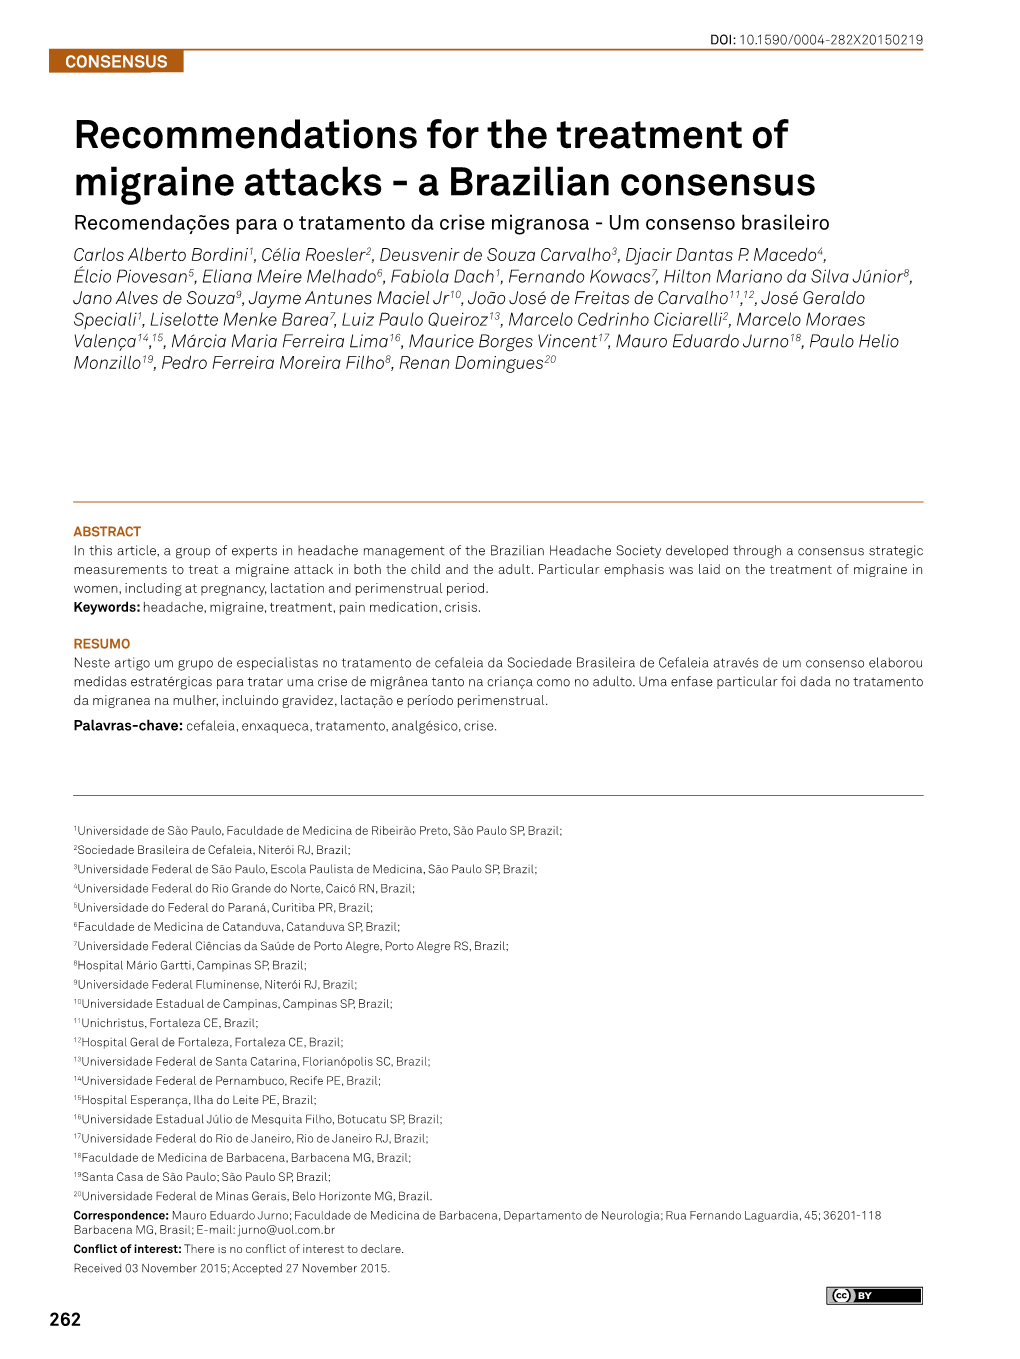 Recommendations for the Treatment of Migraine Attacks